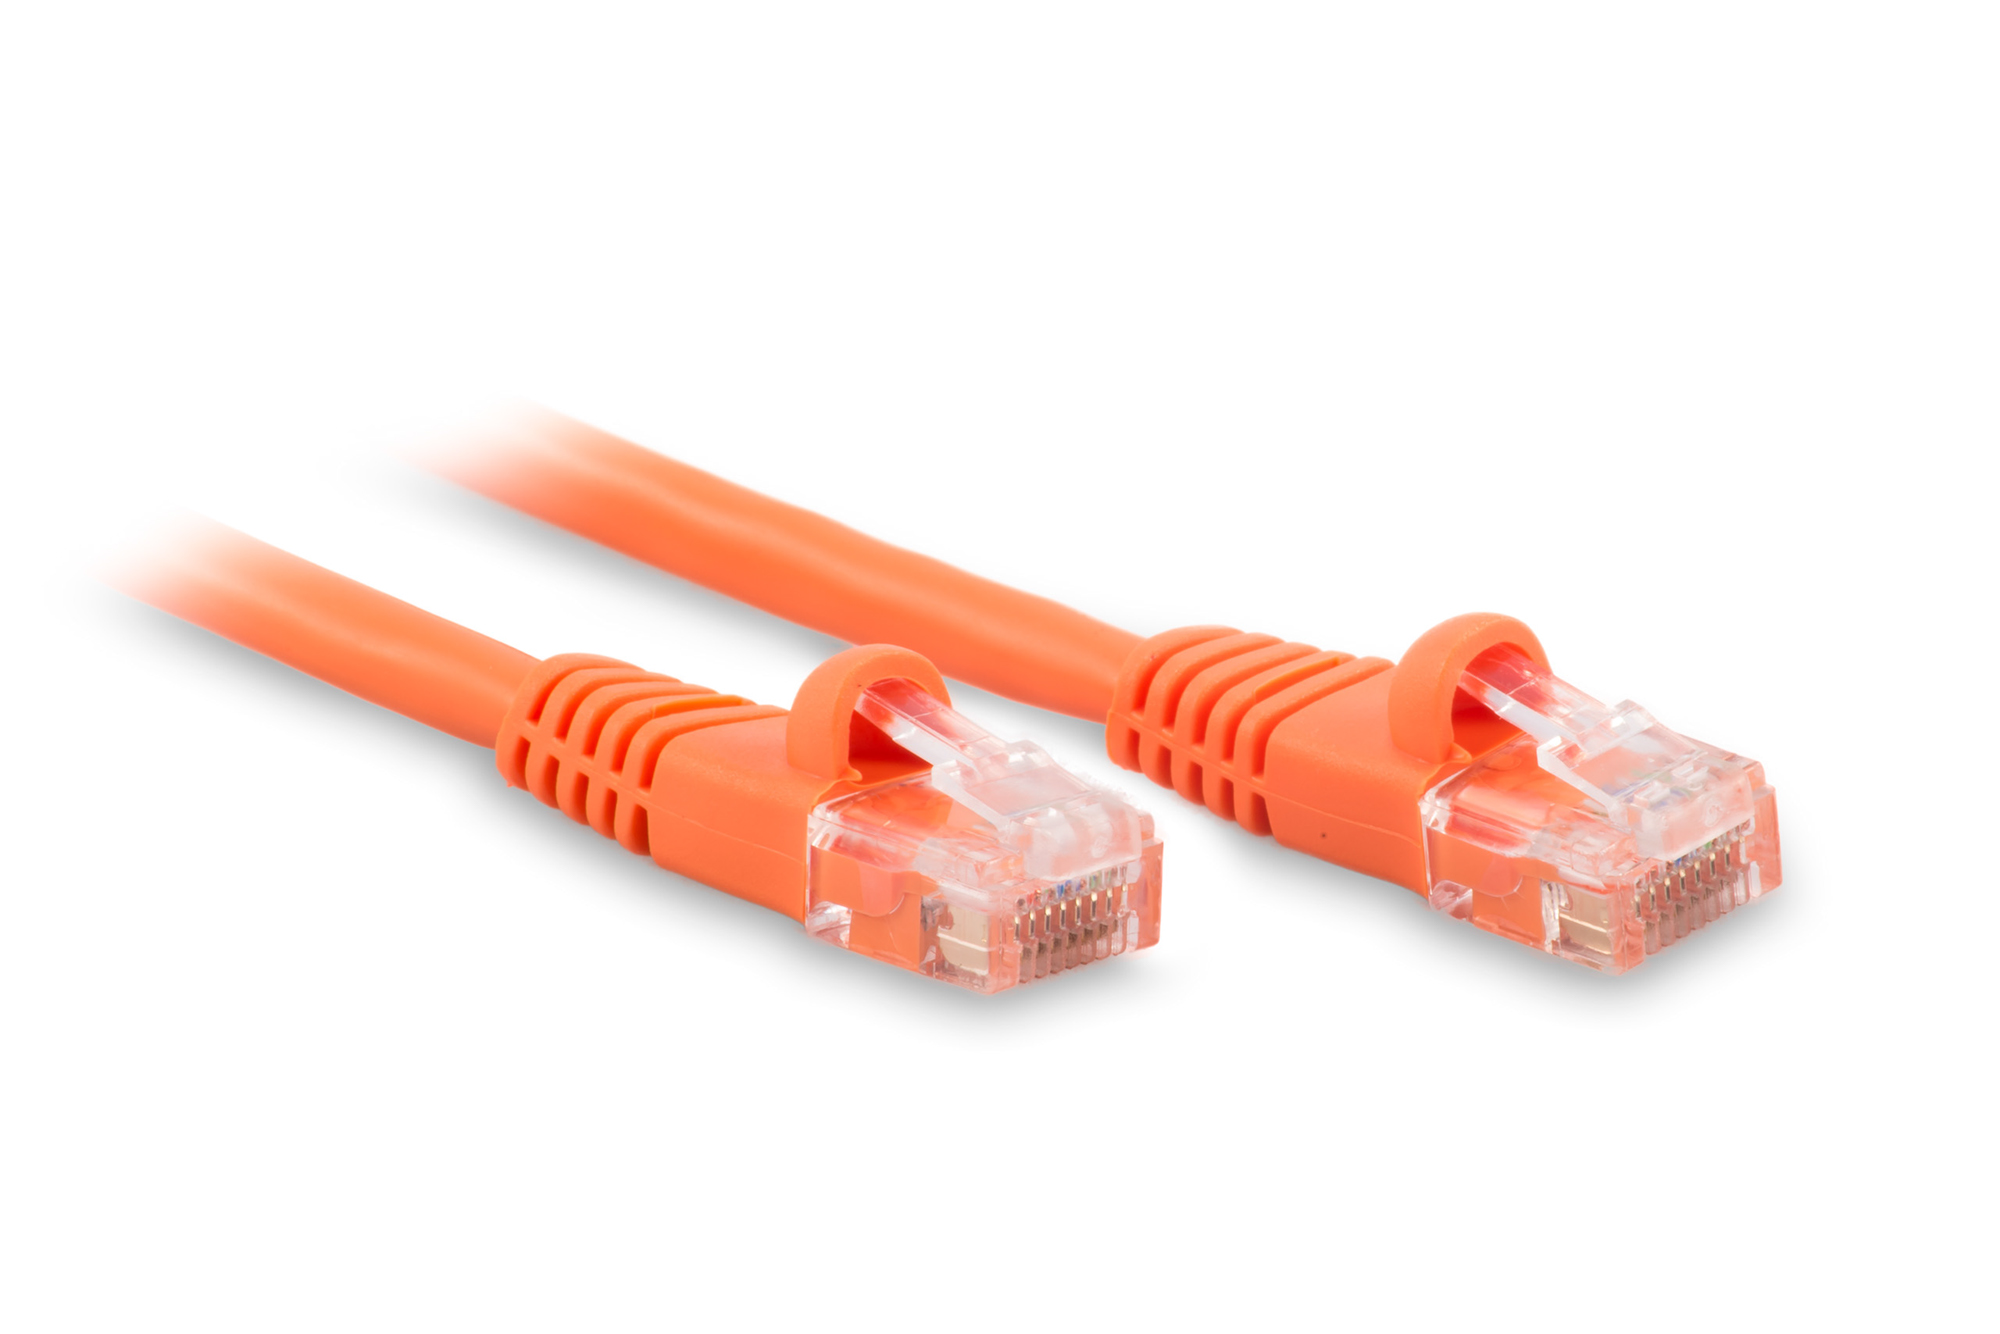 6FT Cat6 Ethernet Patch Cable - Orange Color - Snagless Boot